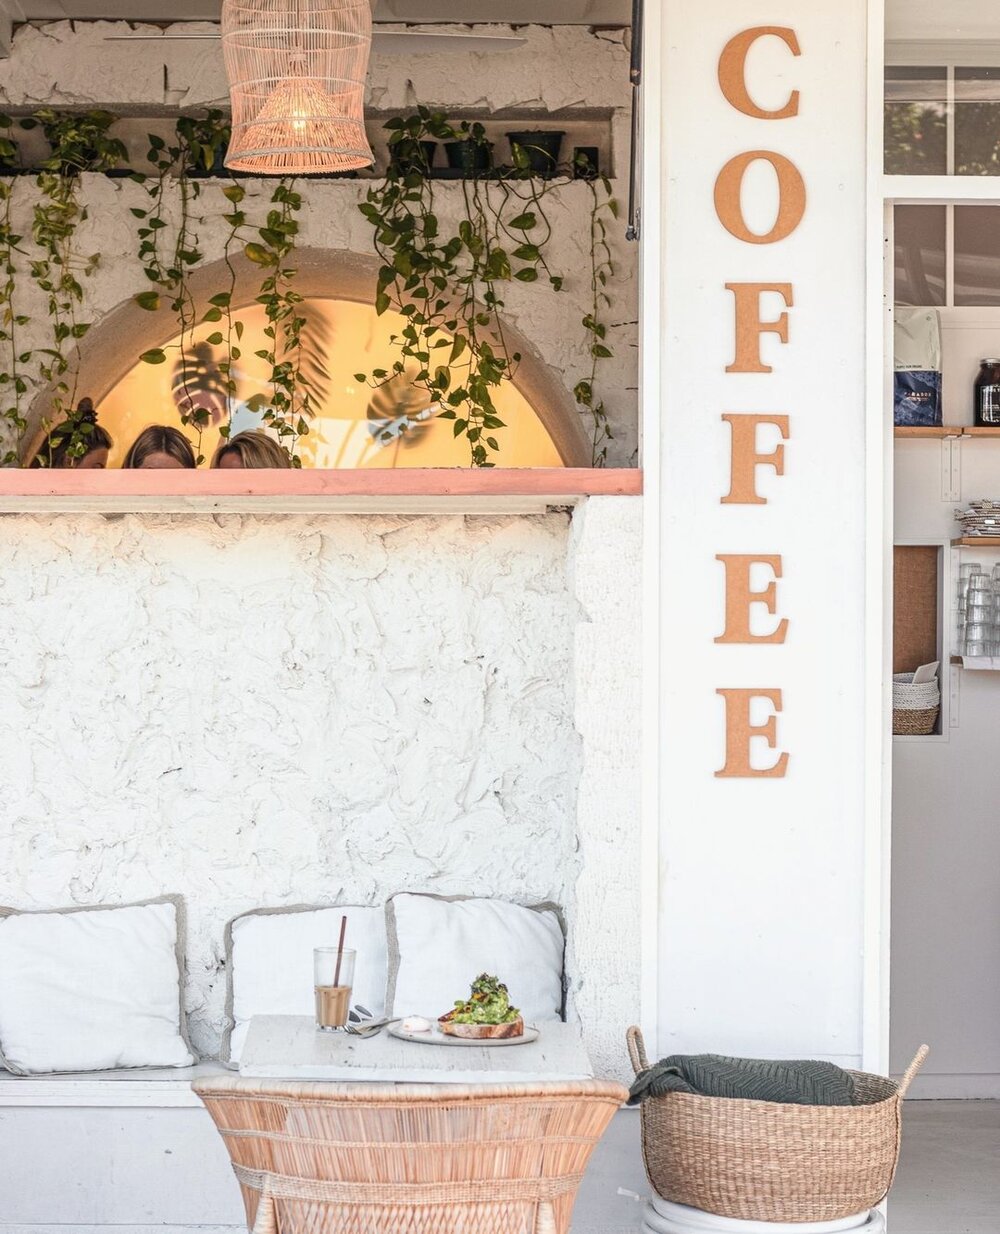  The Milkman’s Daughter Gold Coast. This guide to the best cafes in Gold Coast Australia includes the best breakfast spots in Gold Coast and the best vegan cafes in Gold Coast. Find the best cafes in Burleigh Head, Palm Beach, and more of the best pl